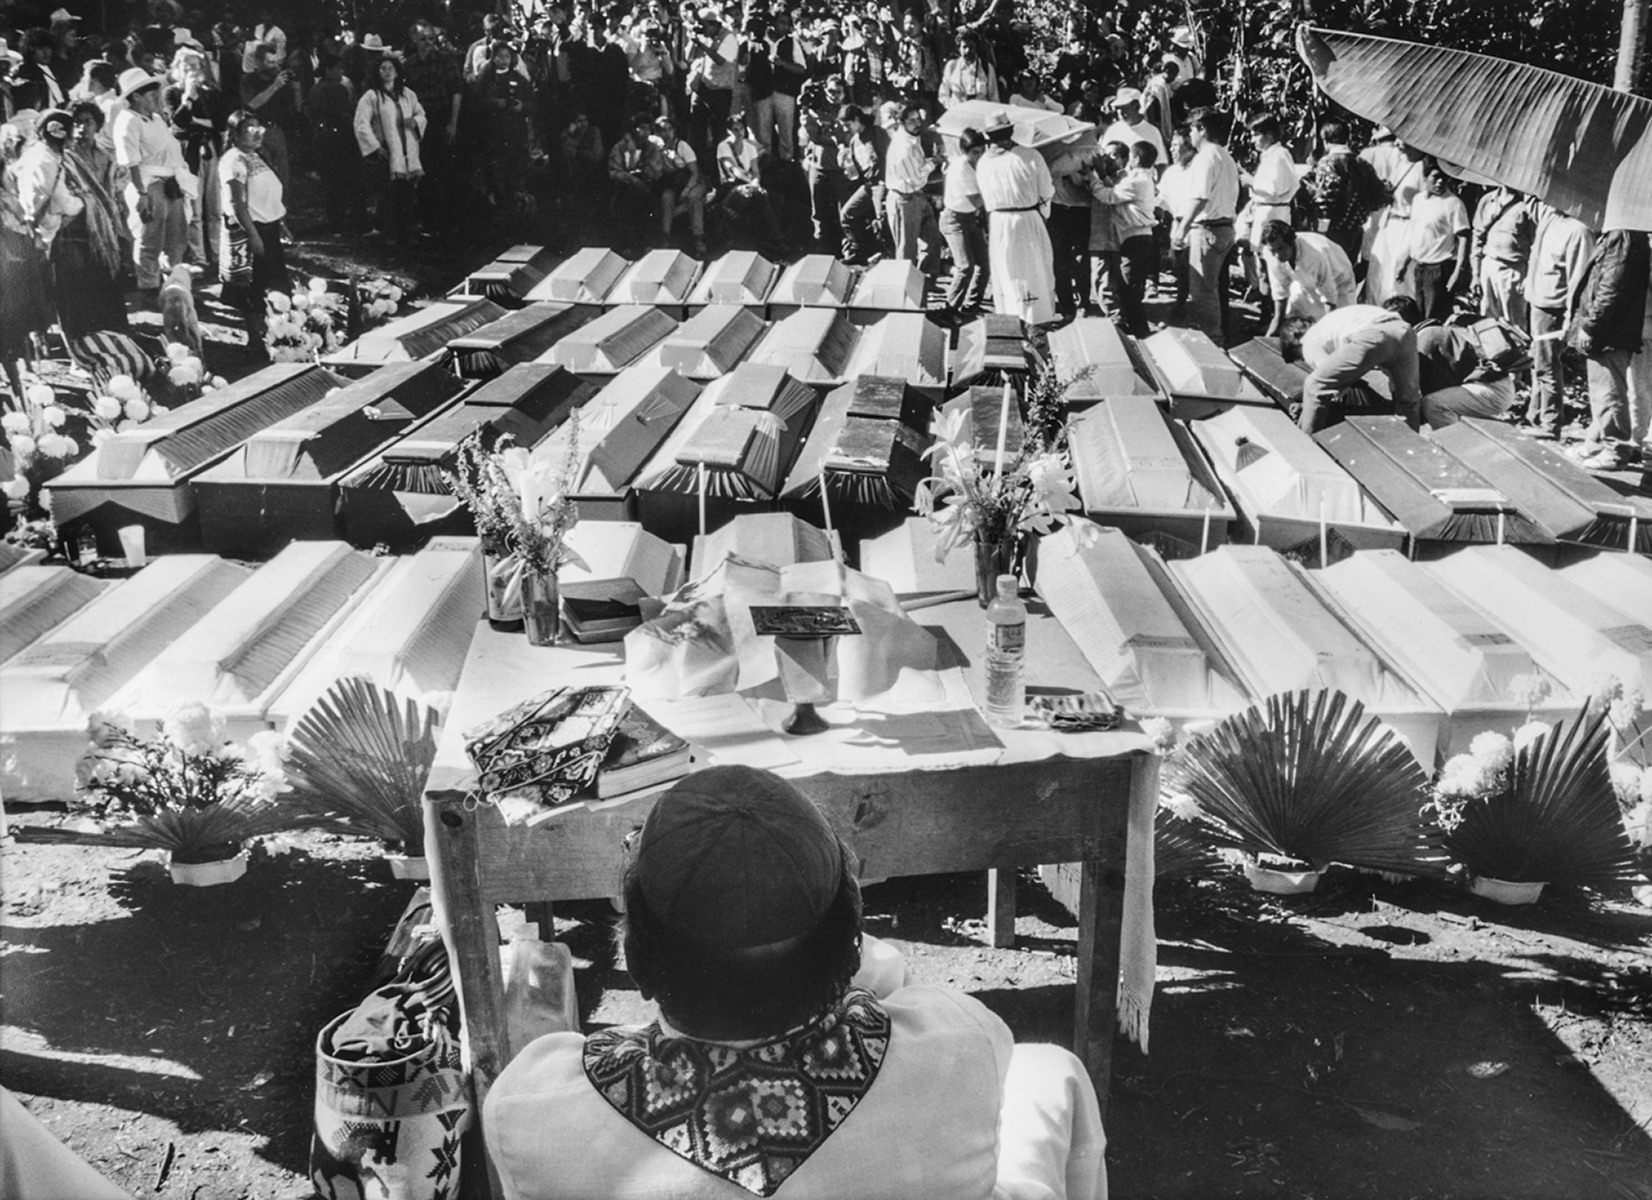 Los Funerales de Acteal / Funeral for the Acteal Victims